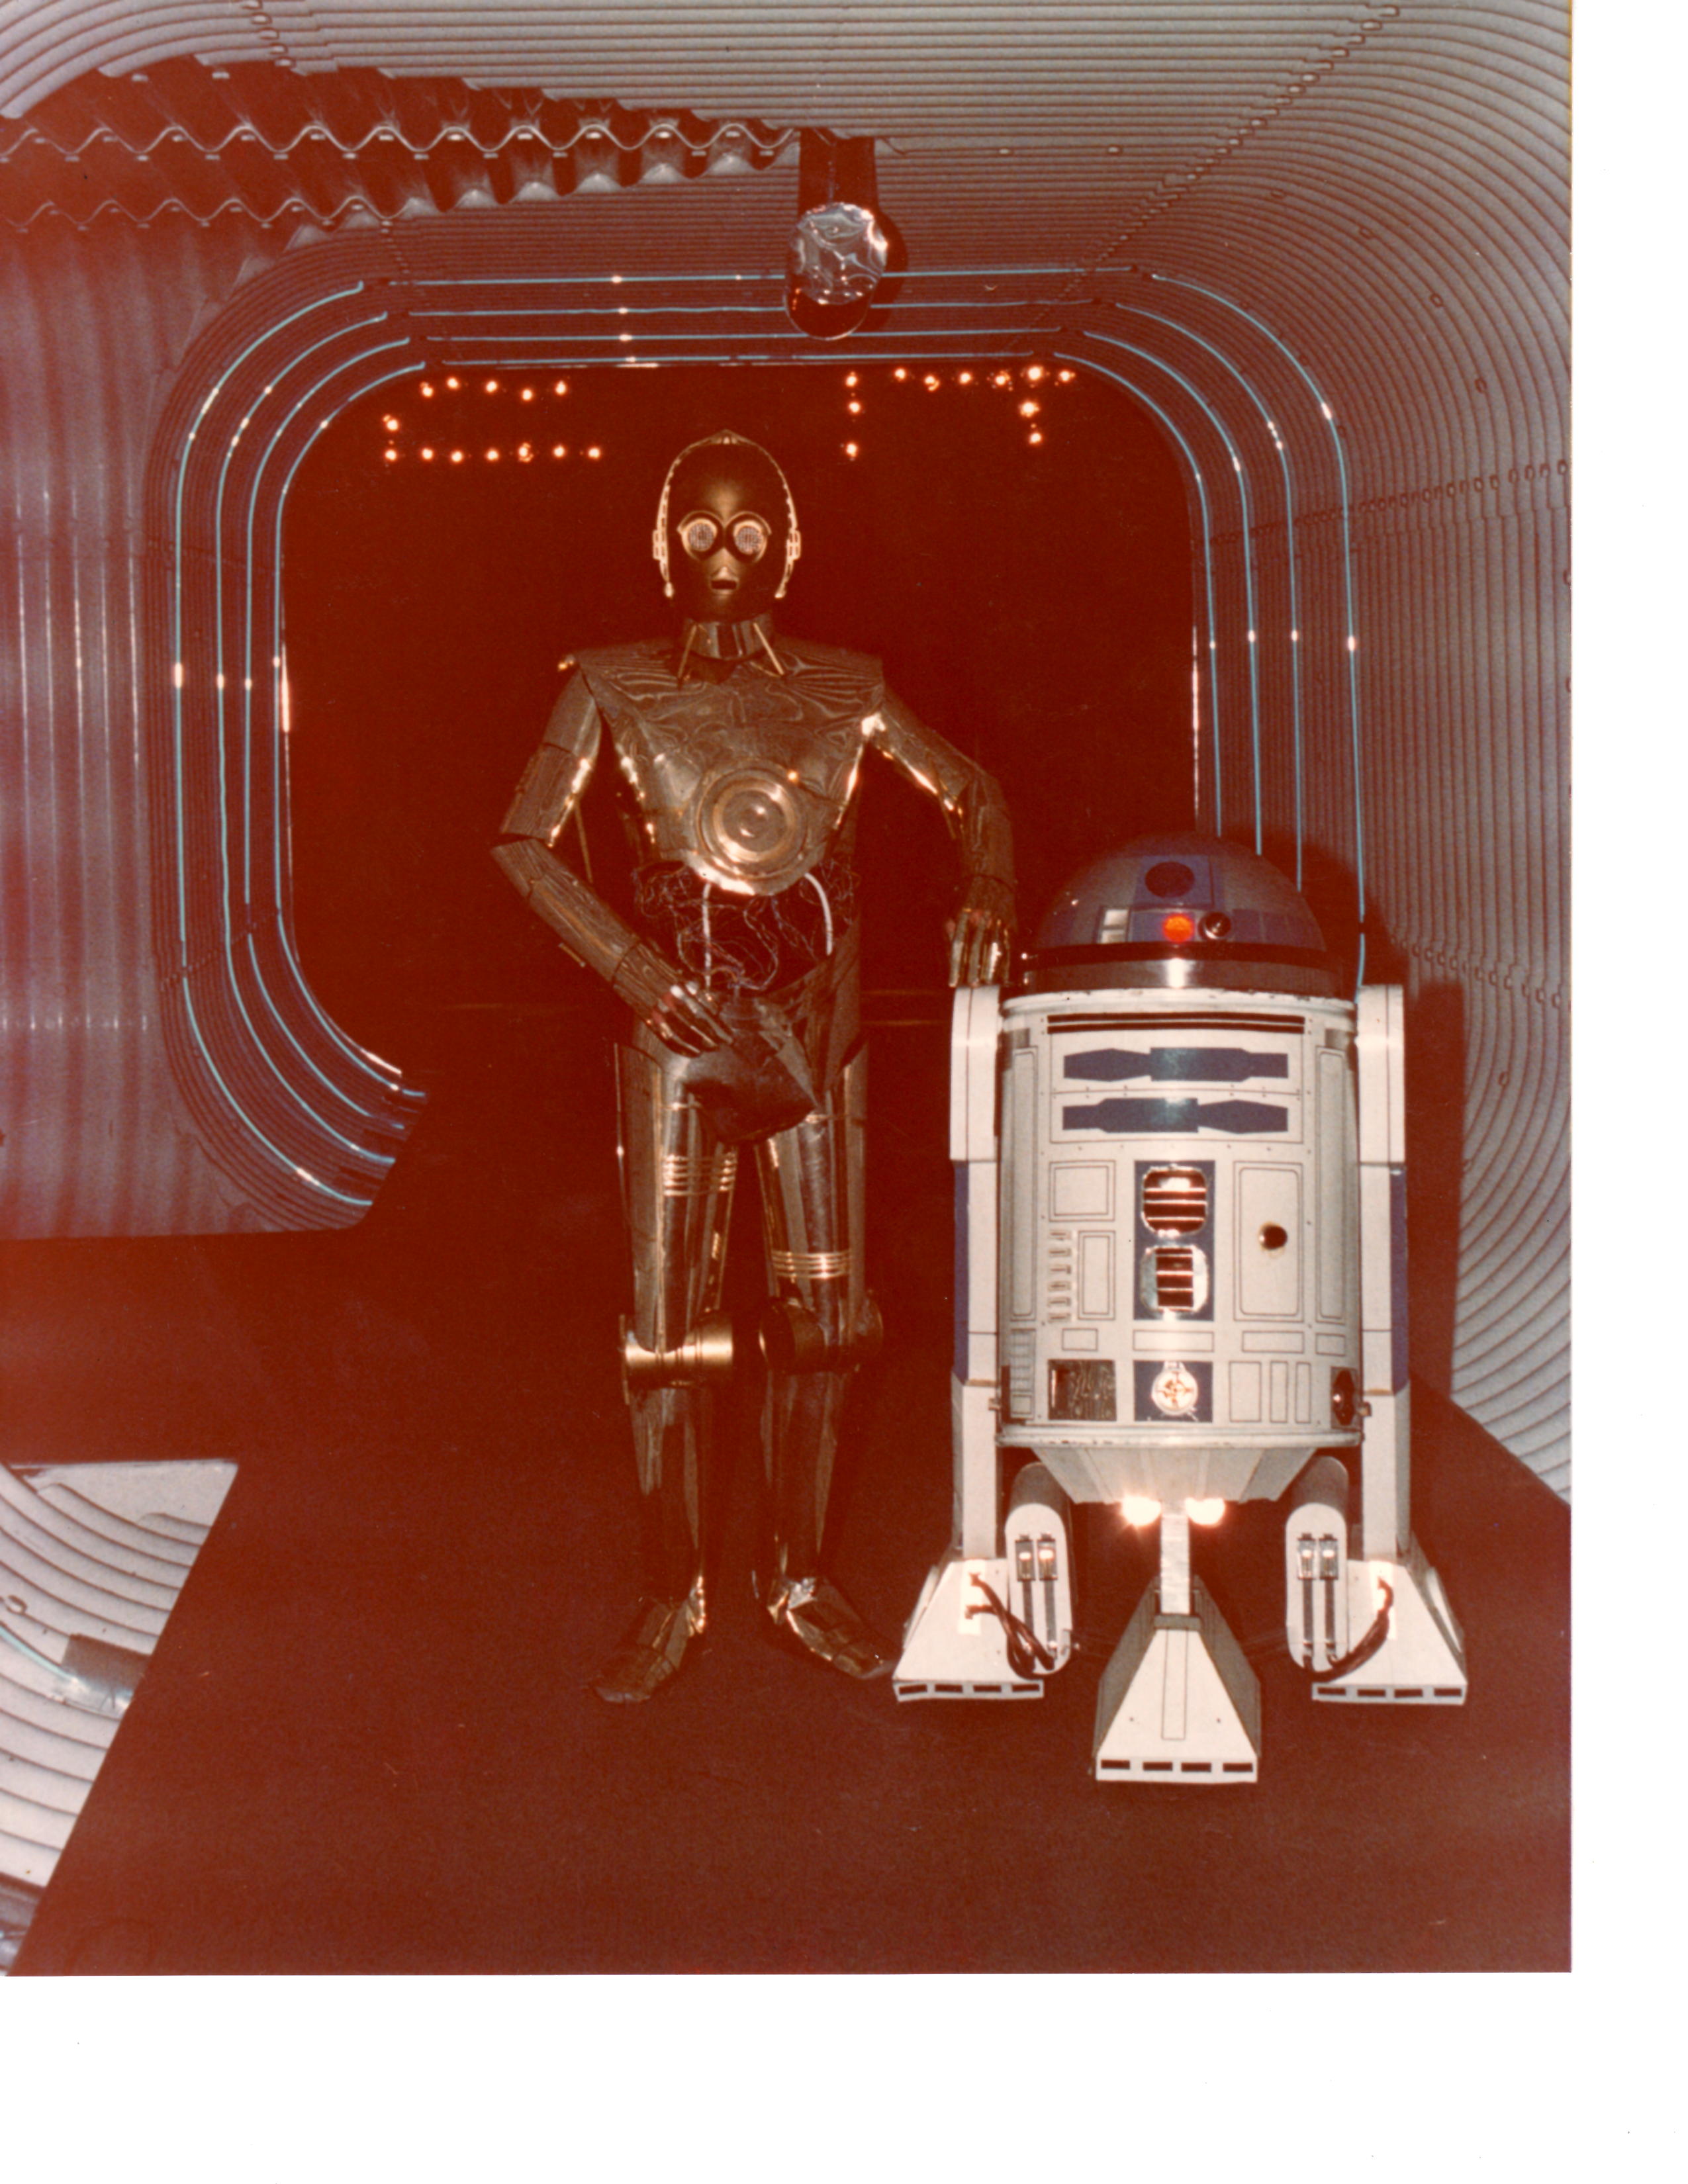 C3PO & R2D2 hangin' out in Manhattan or Mos Eisley?